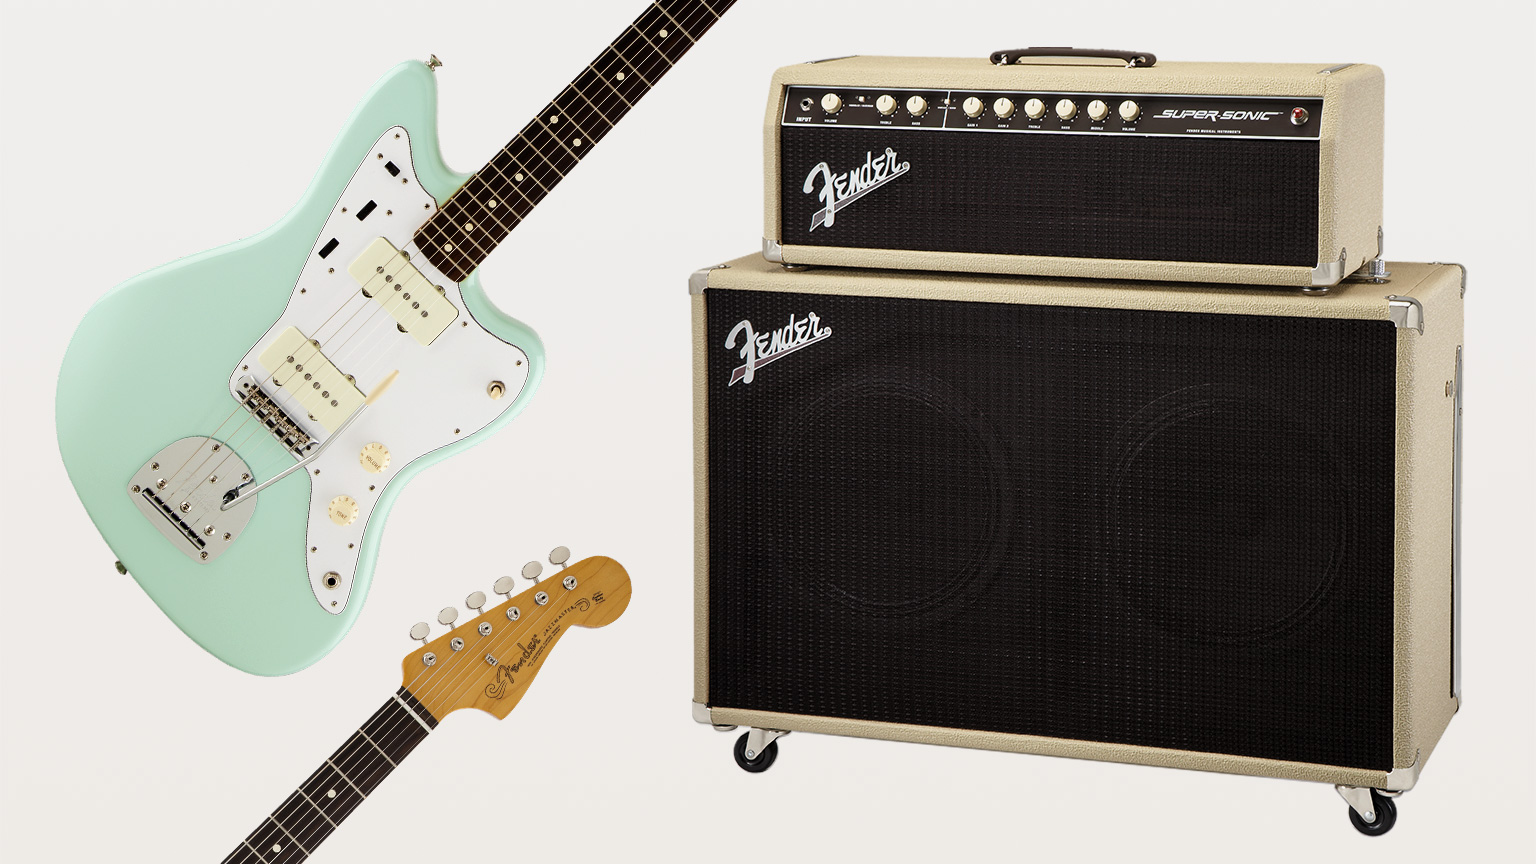 Super-Sonic™ head and matching blonde 212 cabinet